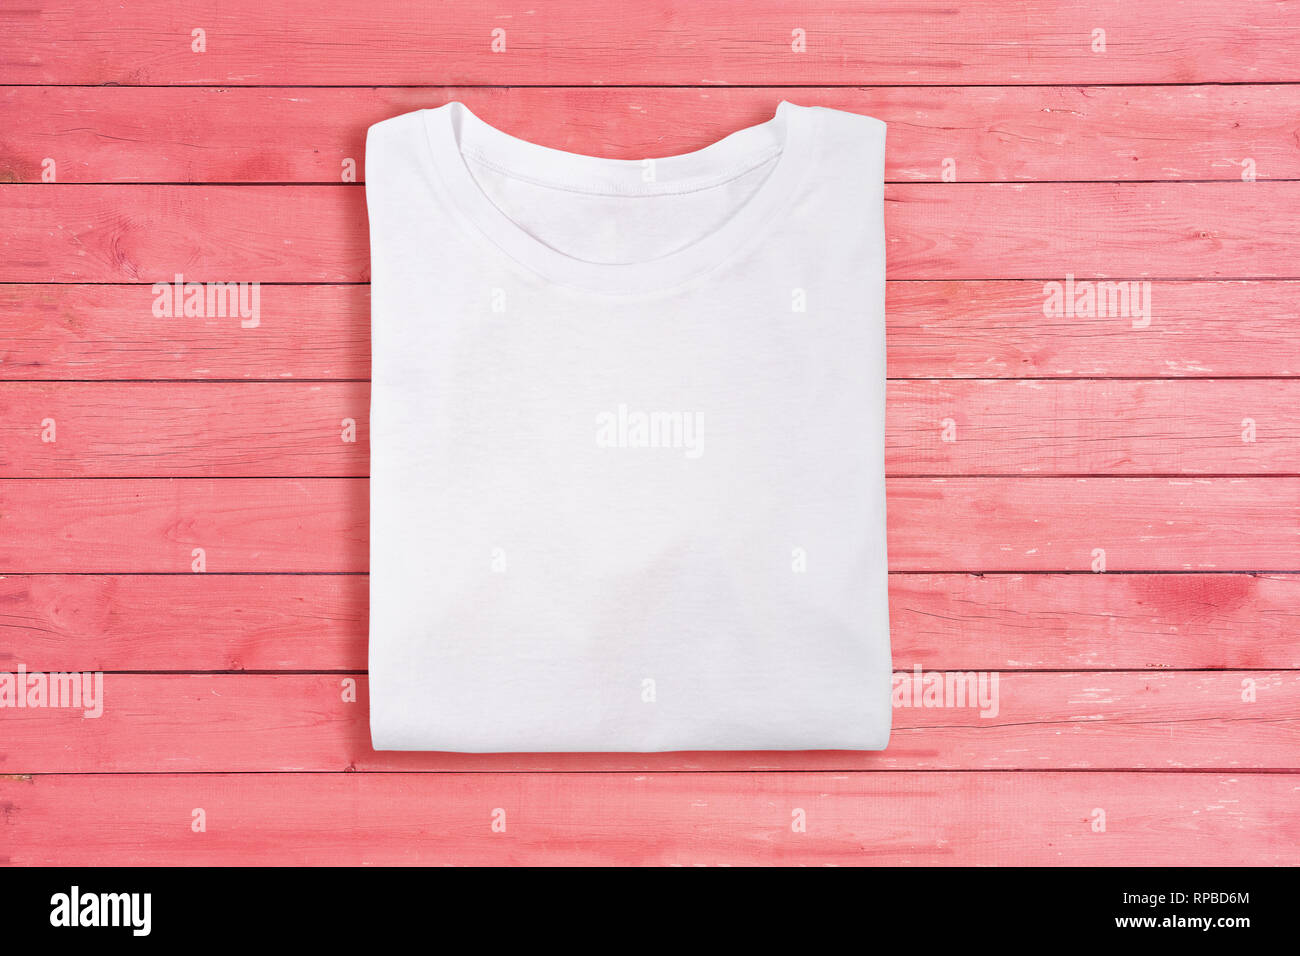 Above view of white folded blank t-shirt on pink wooden background. Female tshirt design template Stock Photo